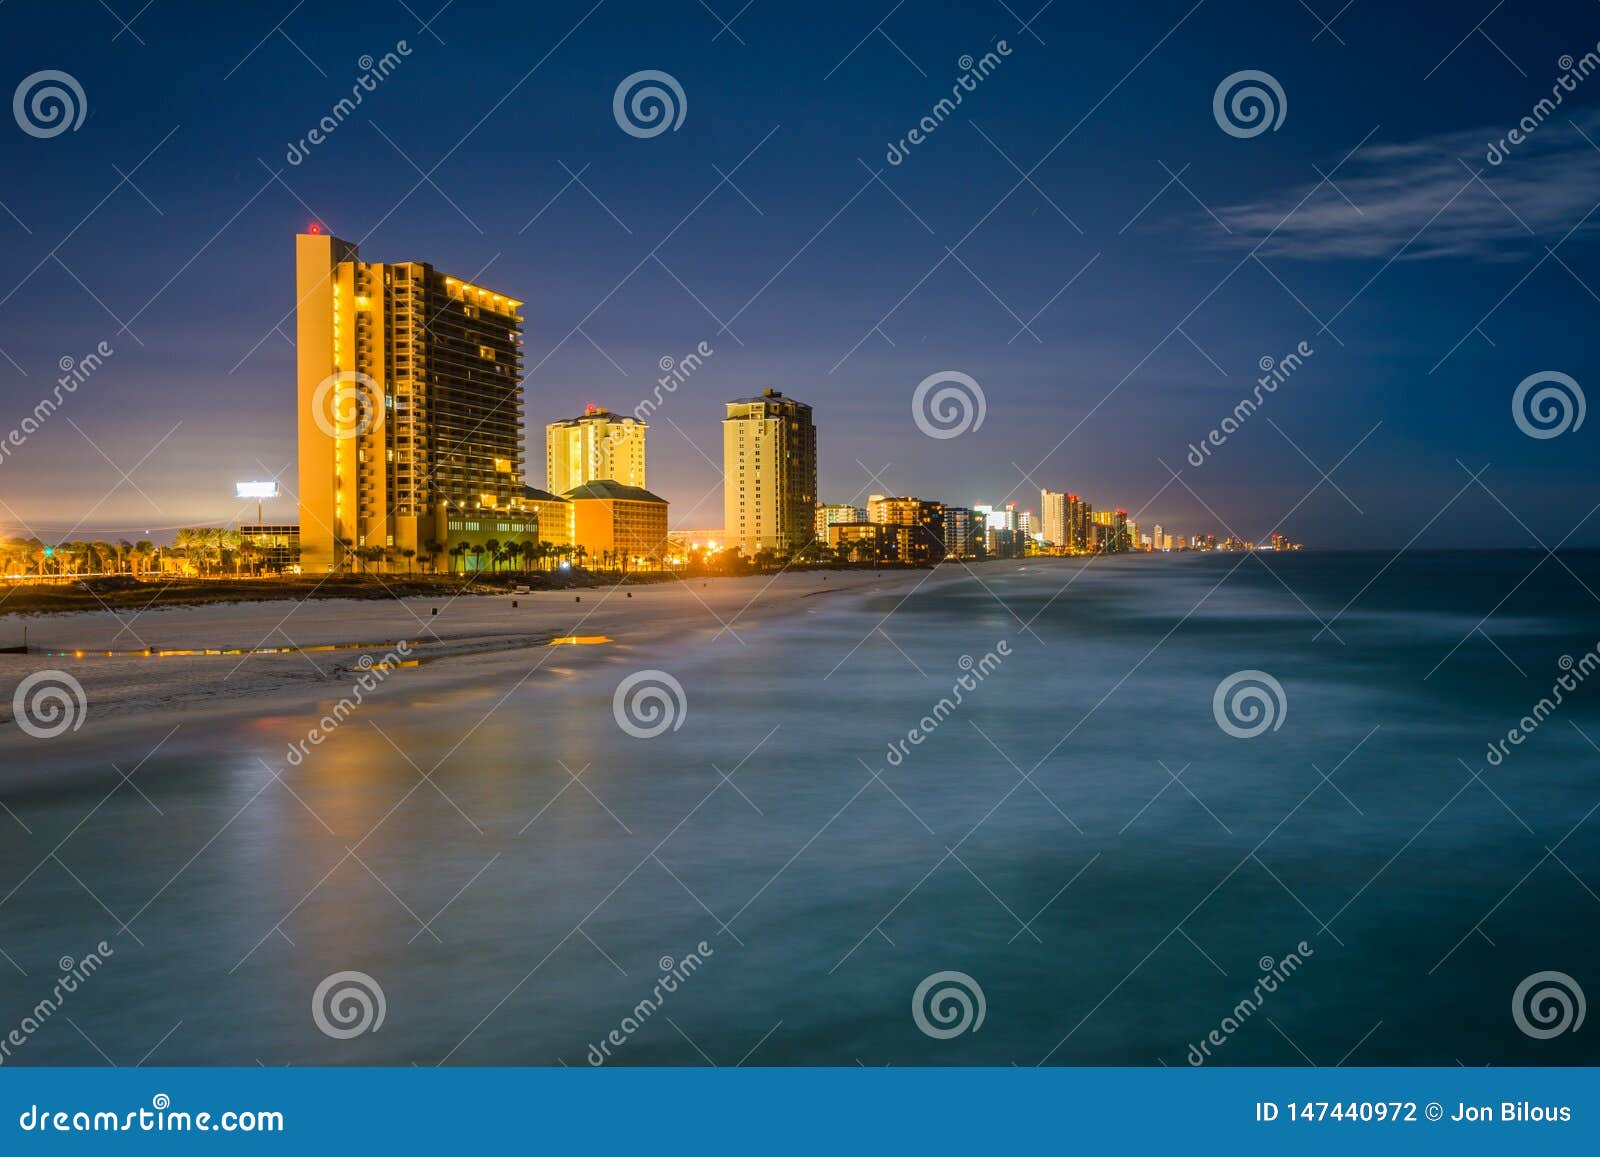 highrises along the gulf of mexico at night, in panama city beach, florida